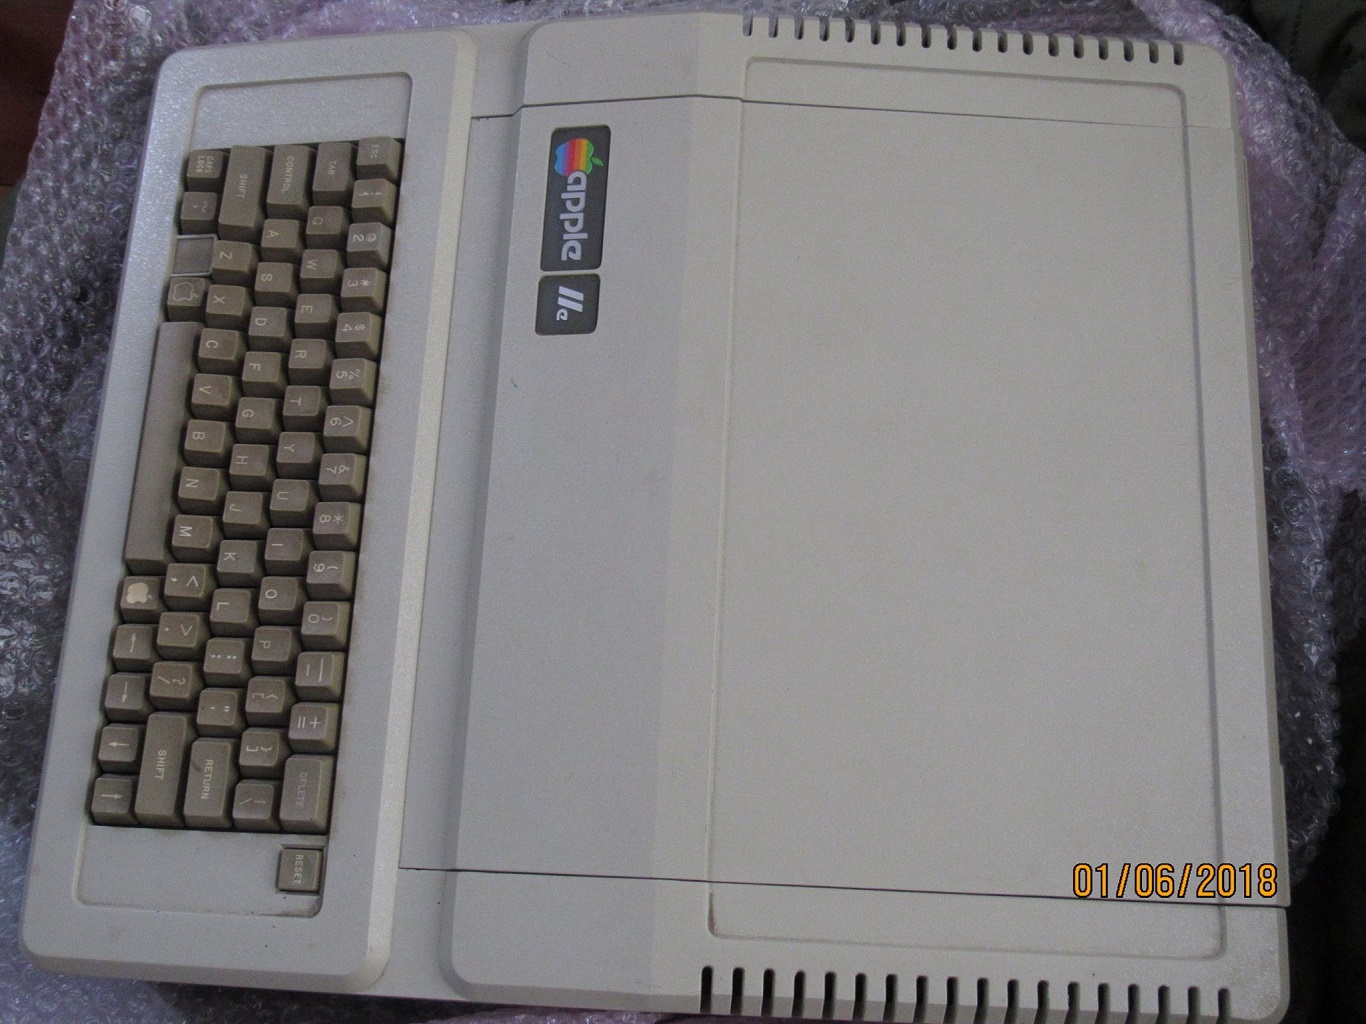 Apple IIe pre-production computer